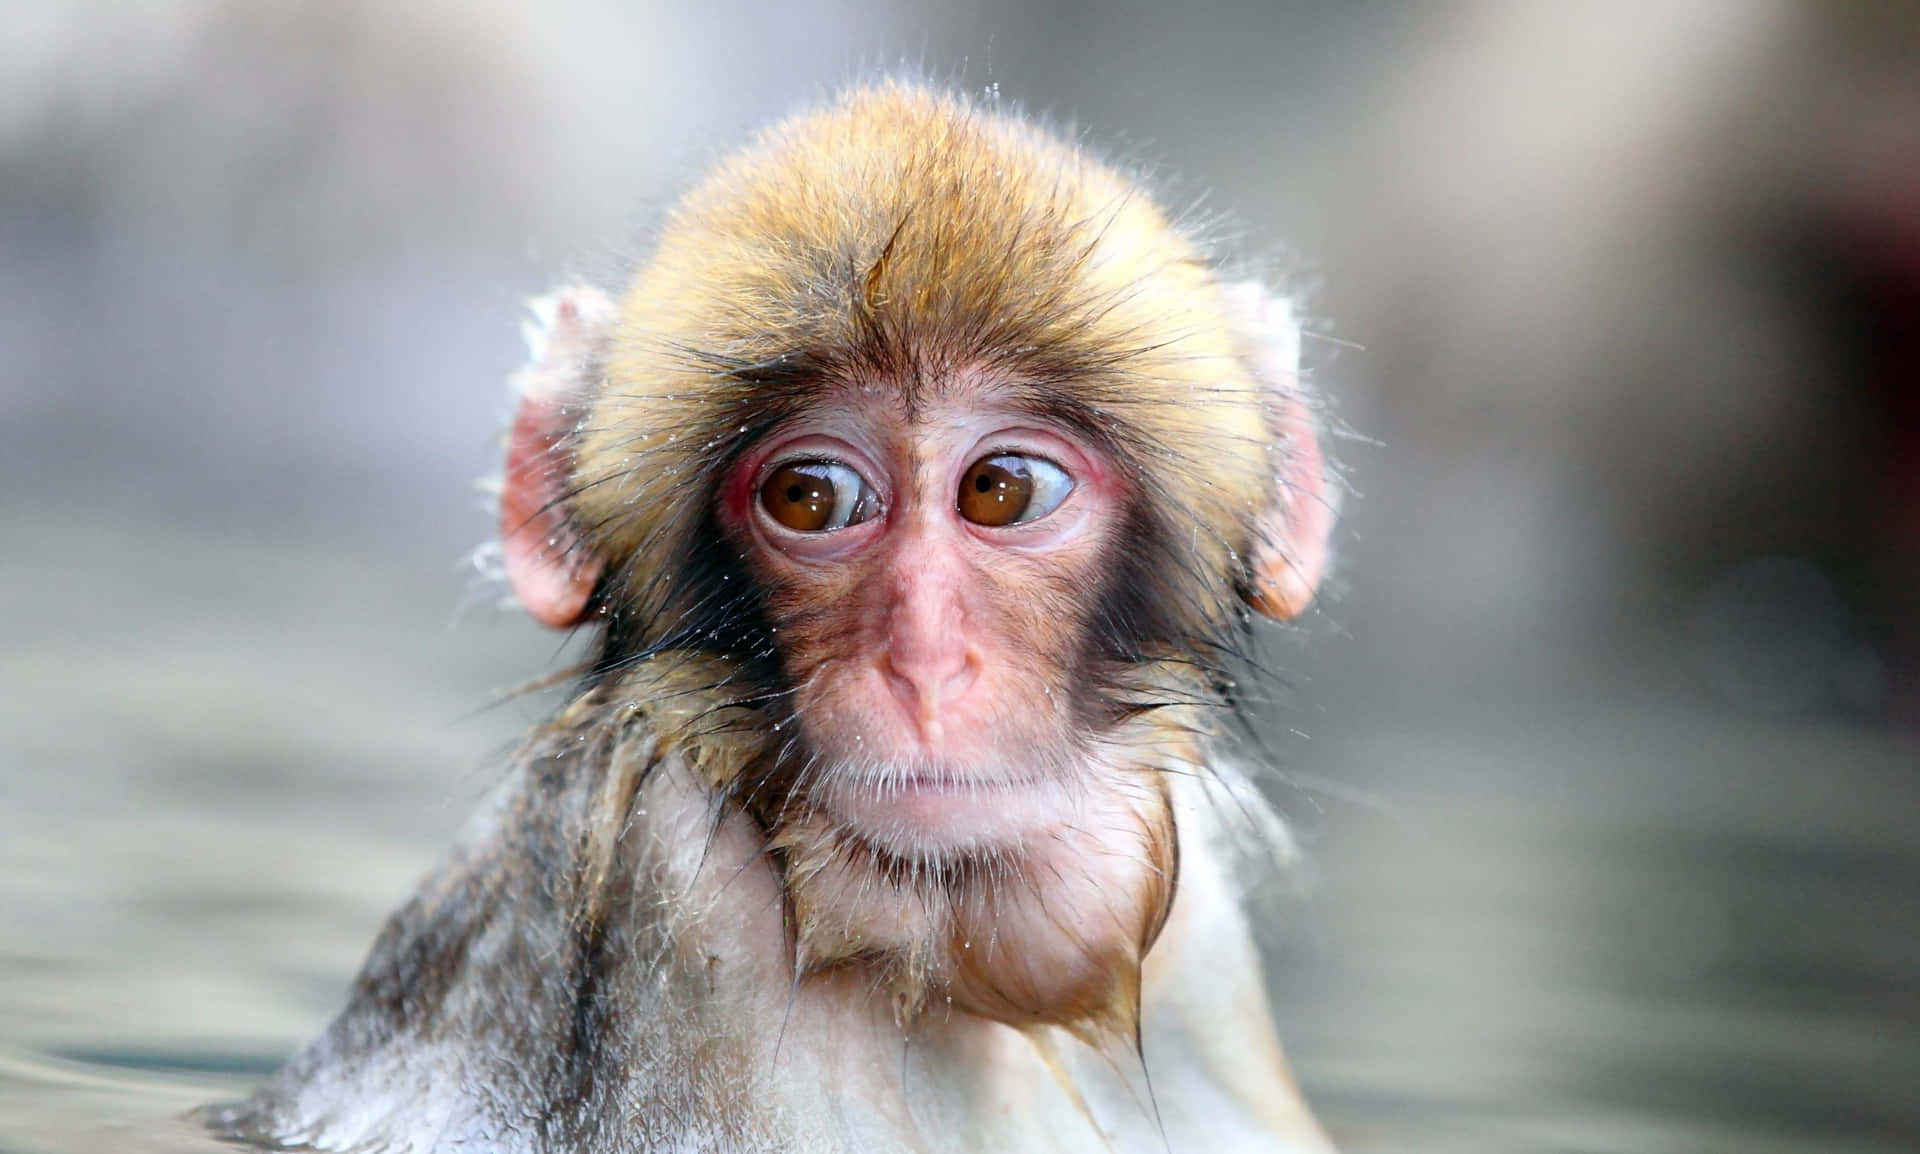 Cute Monkey Photo In Hot Spring Picture